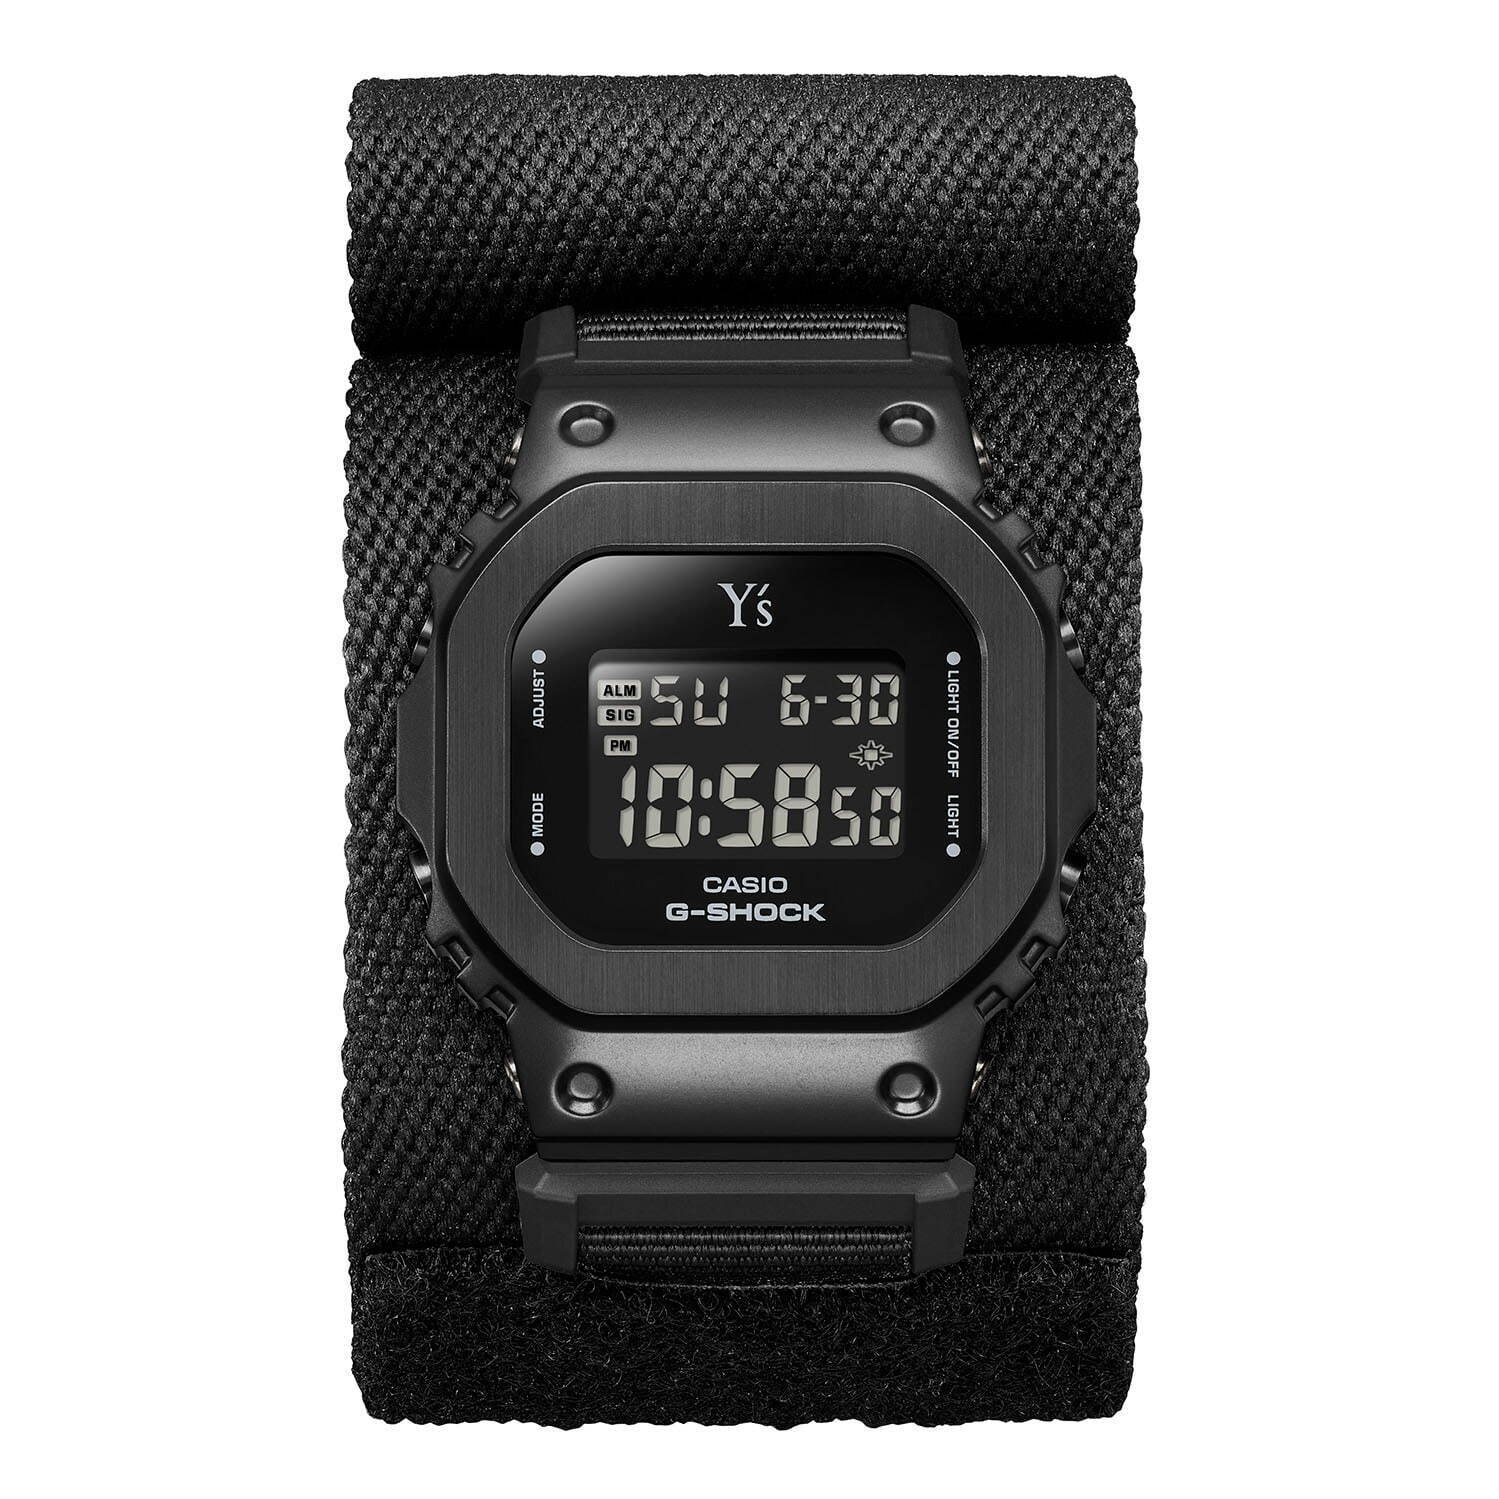 Y's x G-Shock GM-S5600YS-1 includes a covered watch band